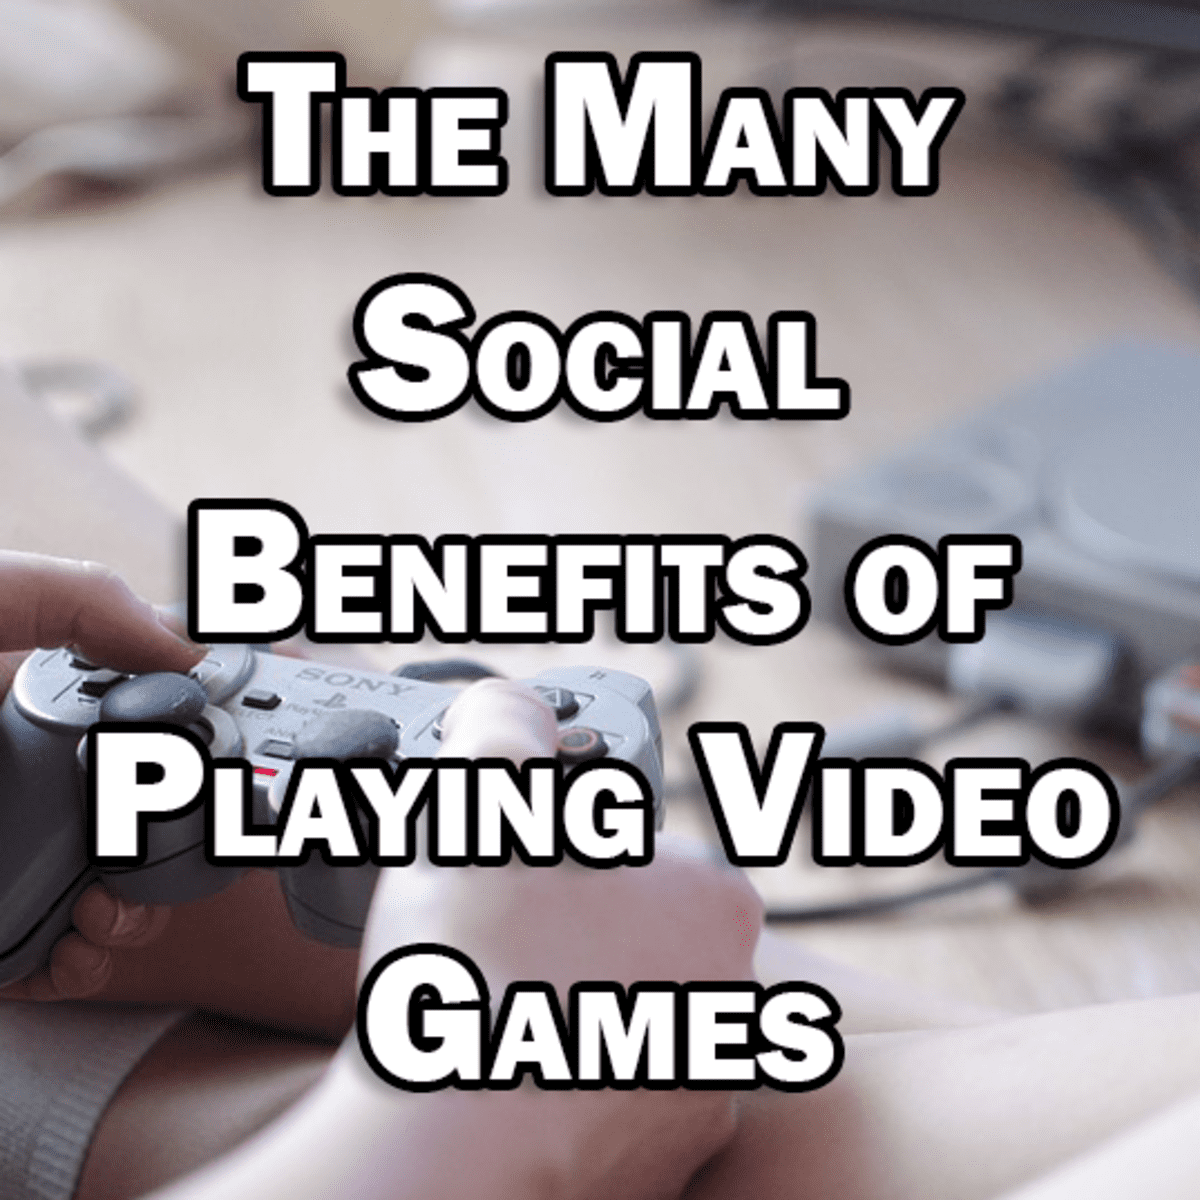 Multiplayer online video games and kids who struggle with social skills